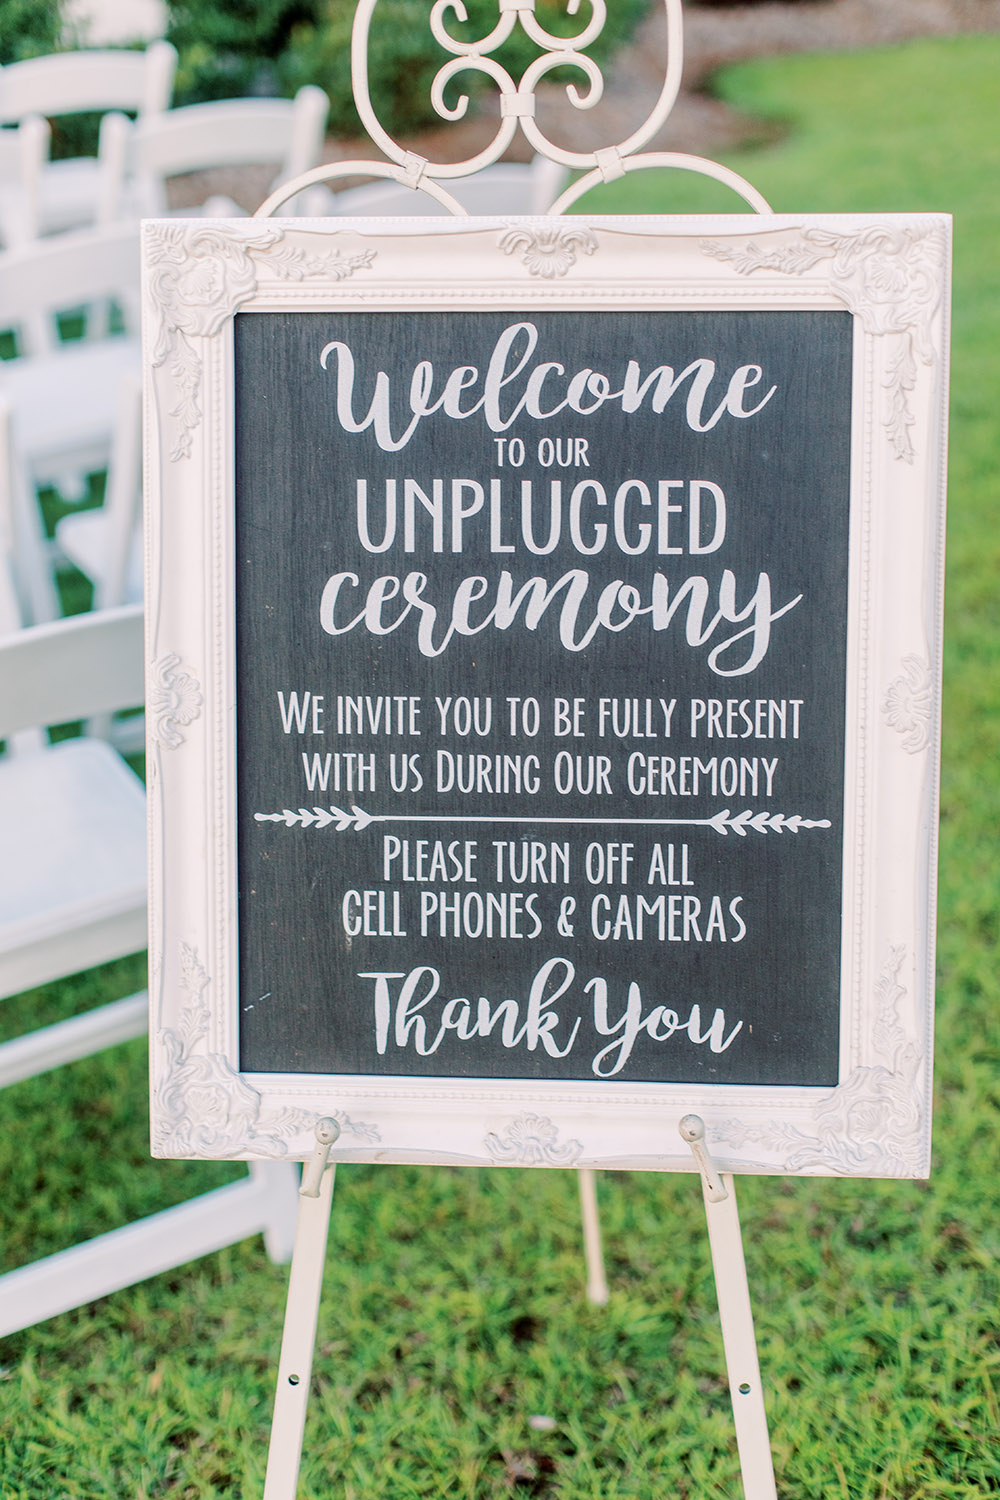 Framed chalkboard sign welcoming guests to an unplugged wedding ceremony. Photo: Ashley Kristen Photography